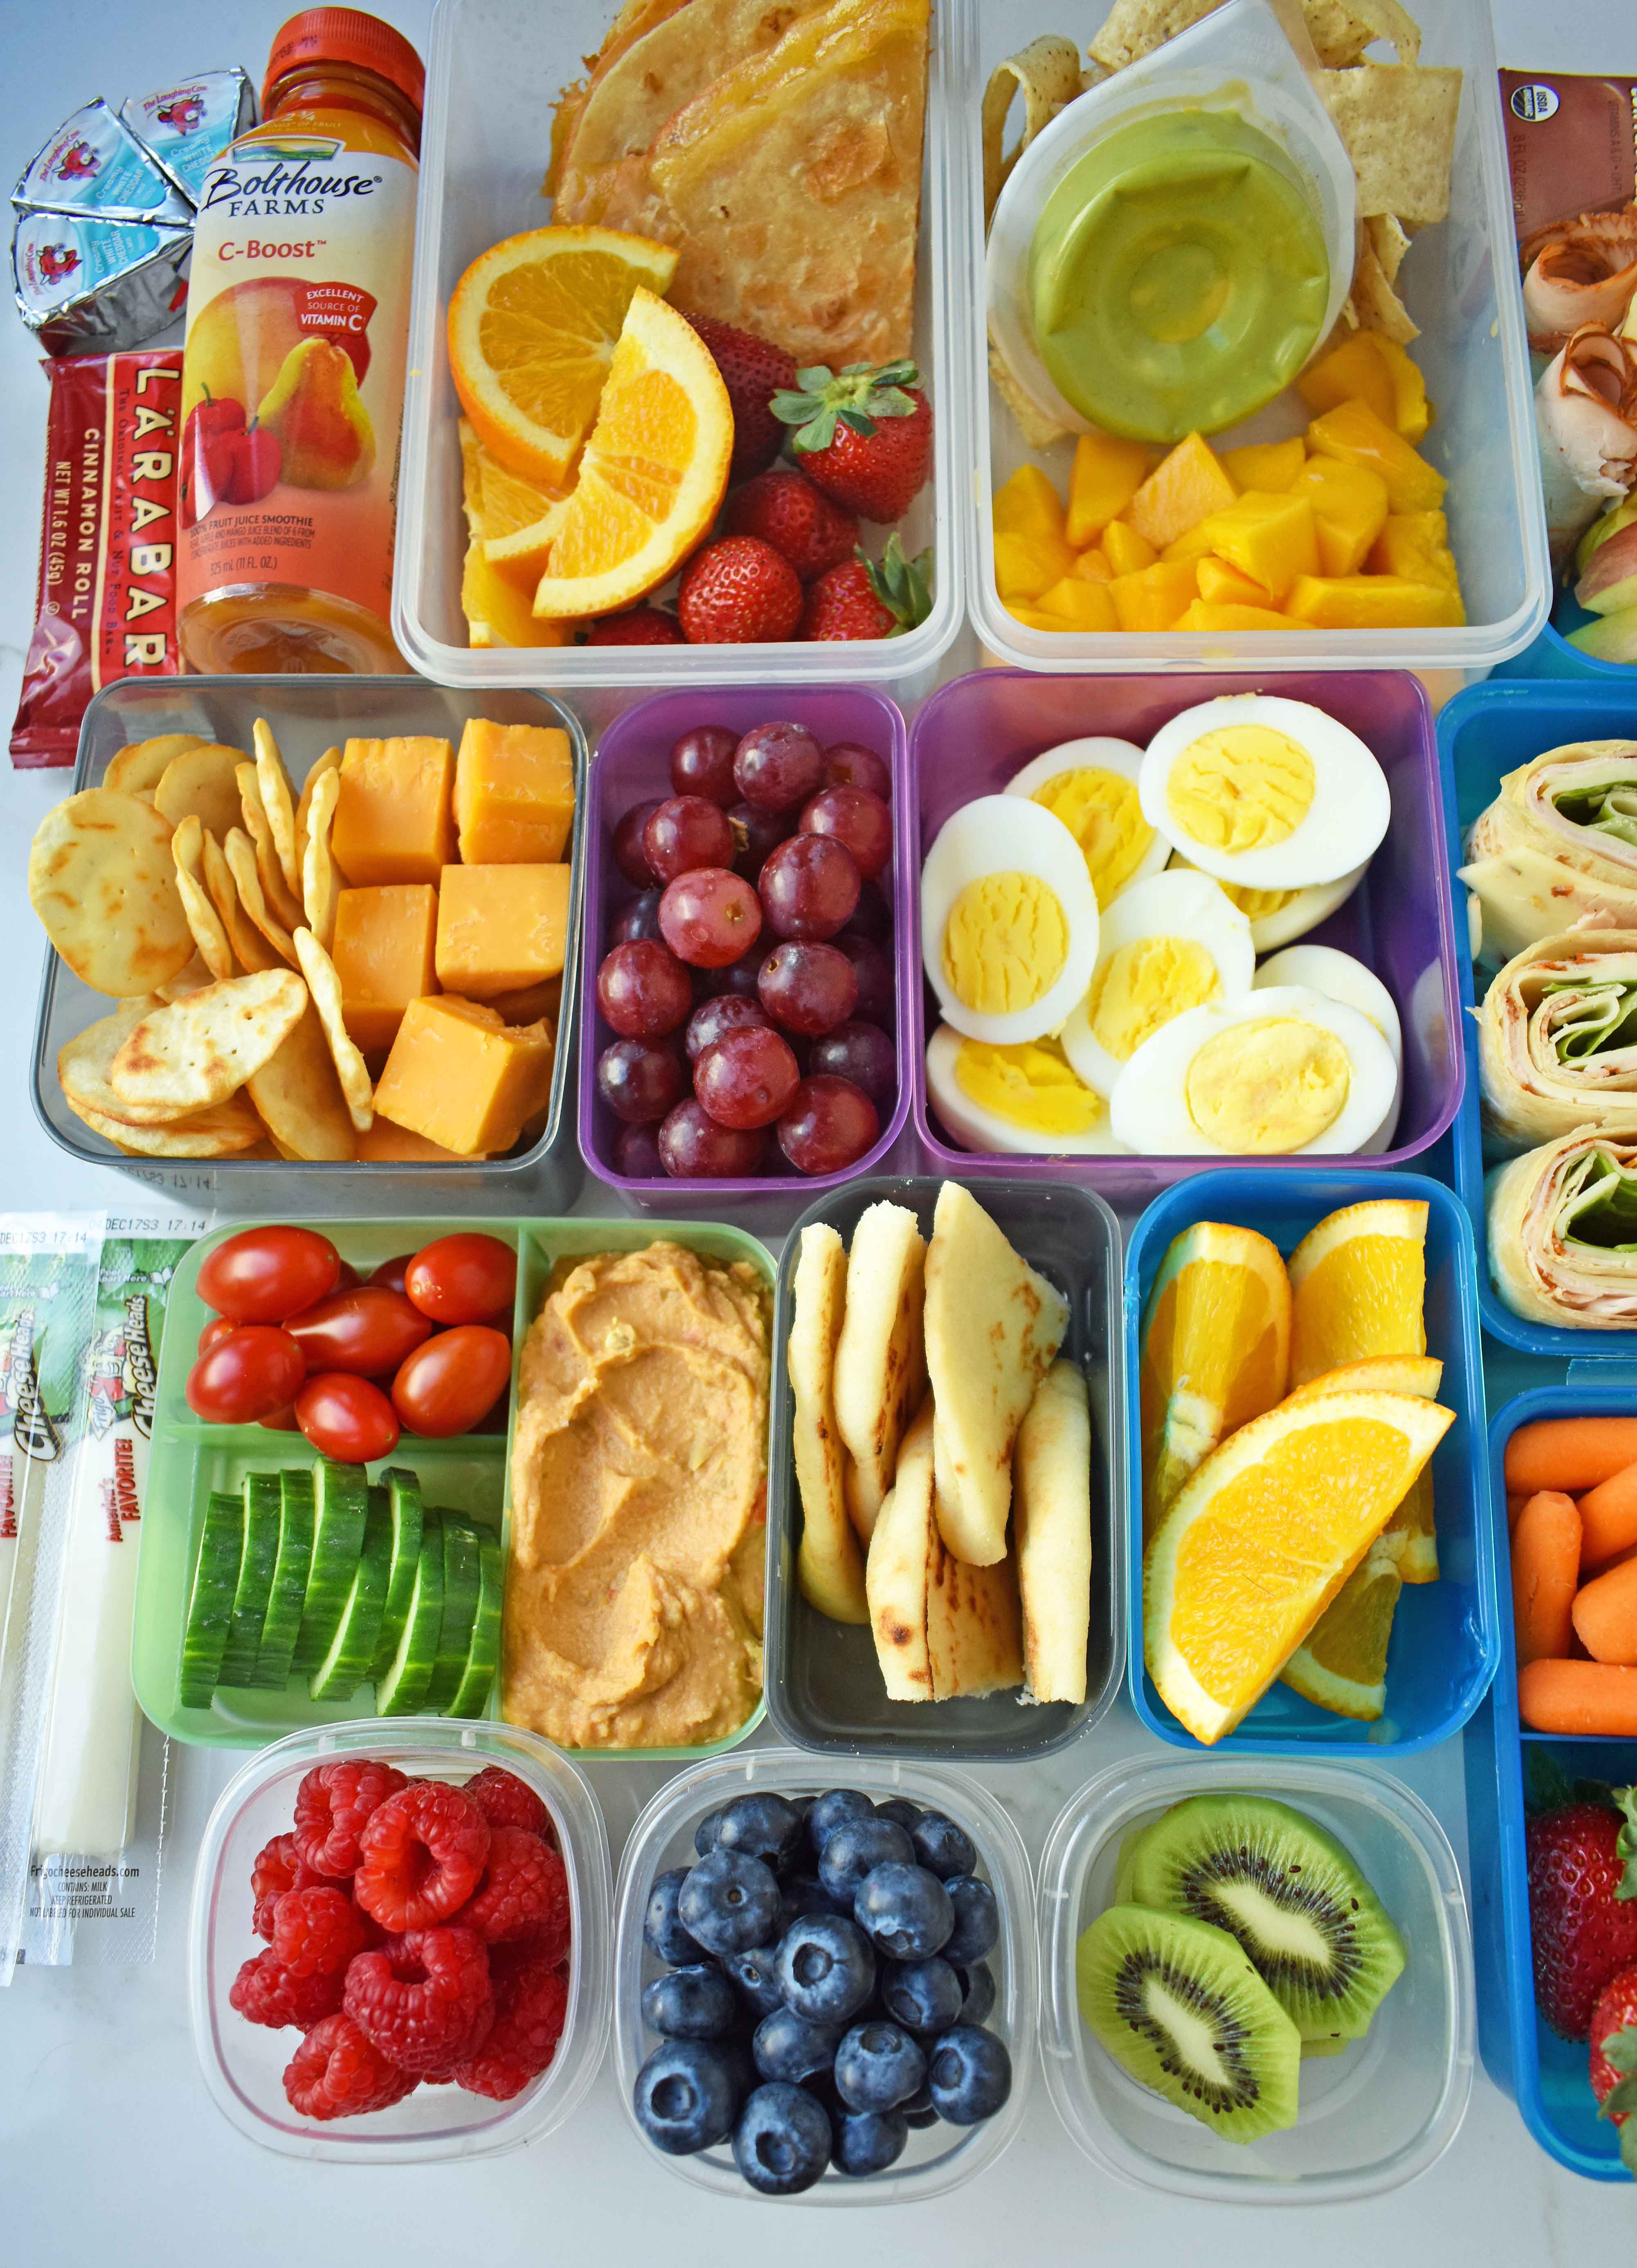 Back to School Kids Lunch Ideas. Healthy kids lunch ideas that includes wraps, roll-ups, sandwiches, quesadillas, gluten-free, meat and cheese kabobs, lunch snack ideas, and fresh fruits and veggies. Healthy lunch ideas by Modern Honey. www.modernhoney.com